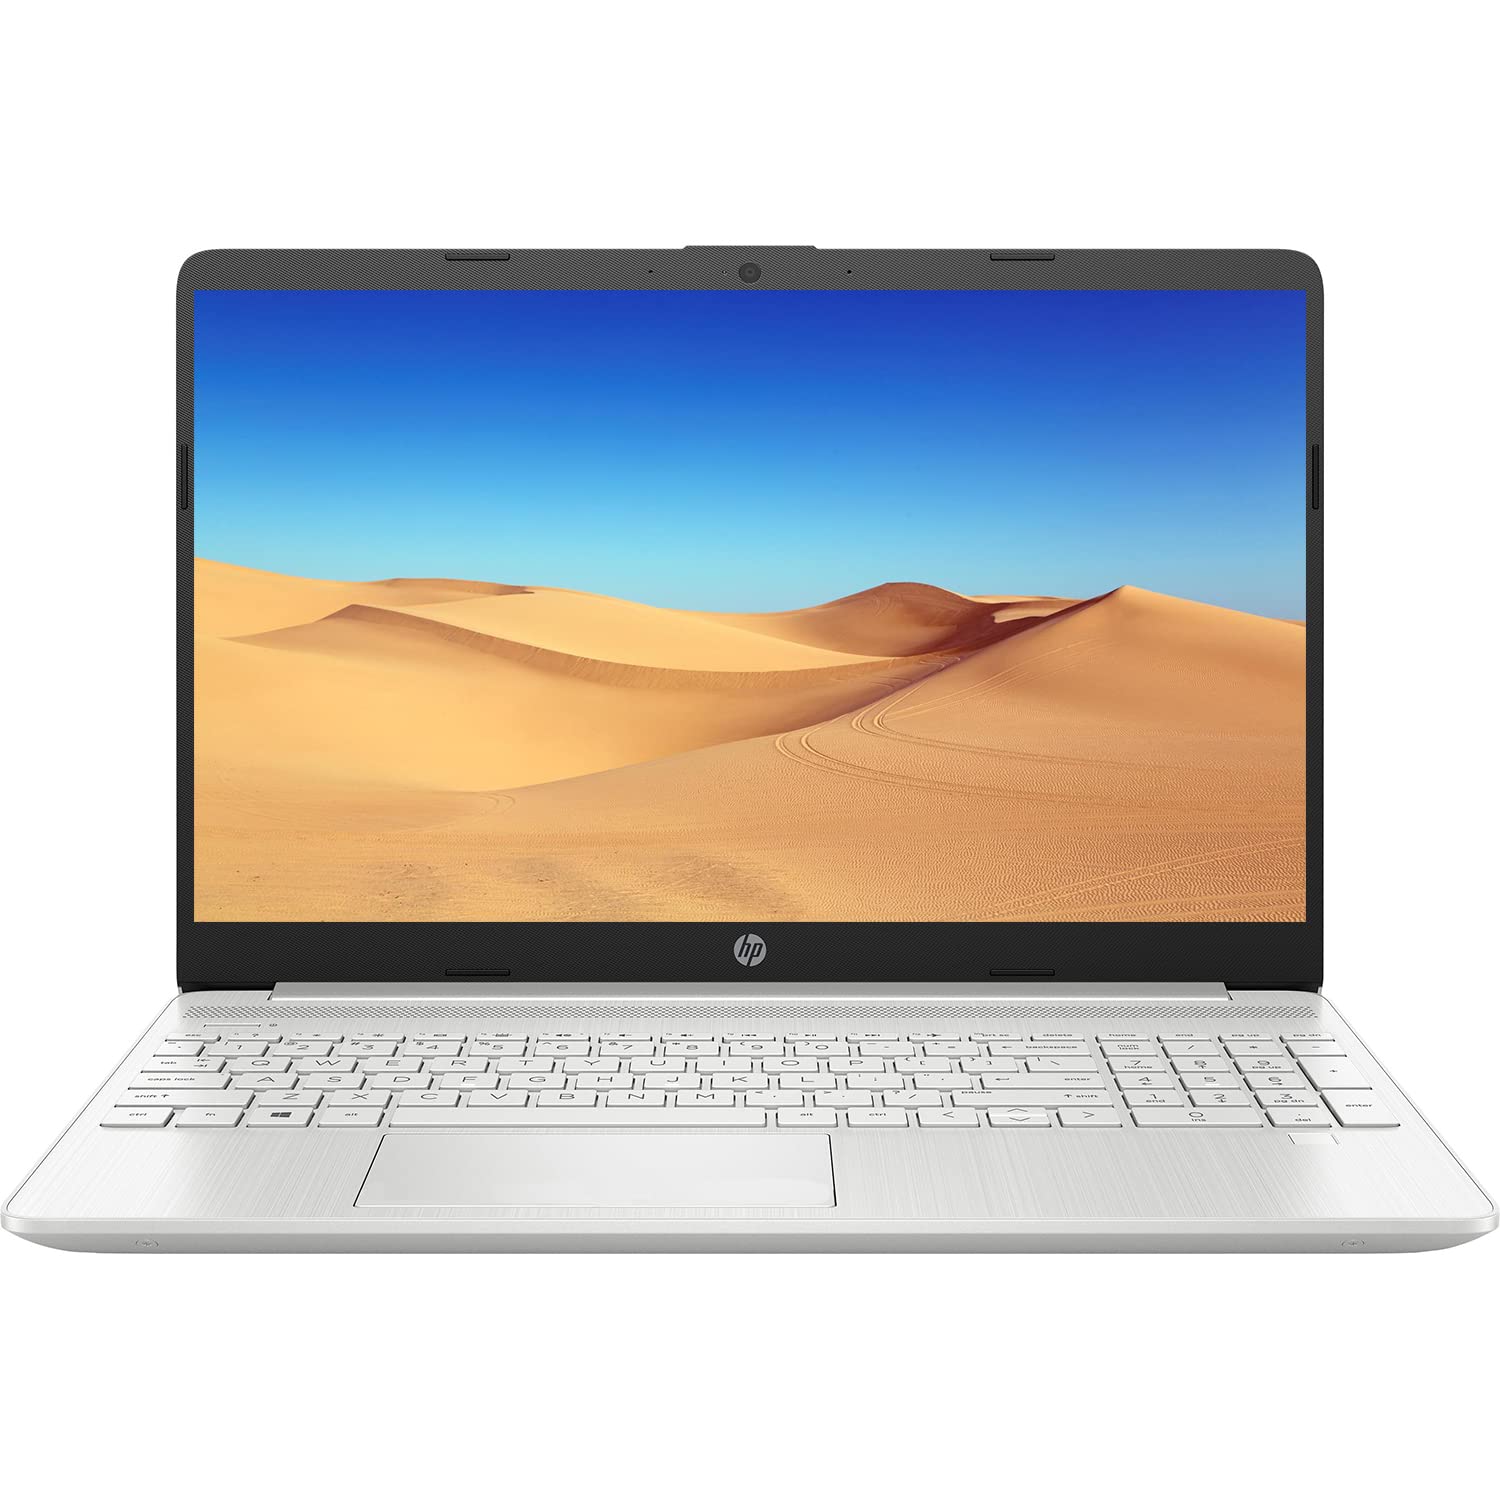 Read more about the article An Excellent Overview of HP 15 inch Laptop, FHD Display, Intel Core i3